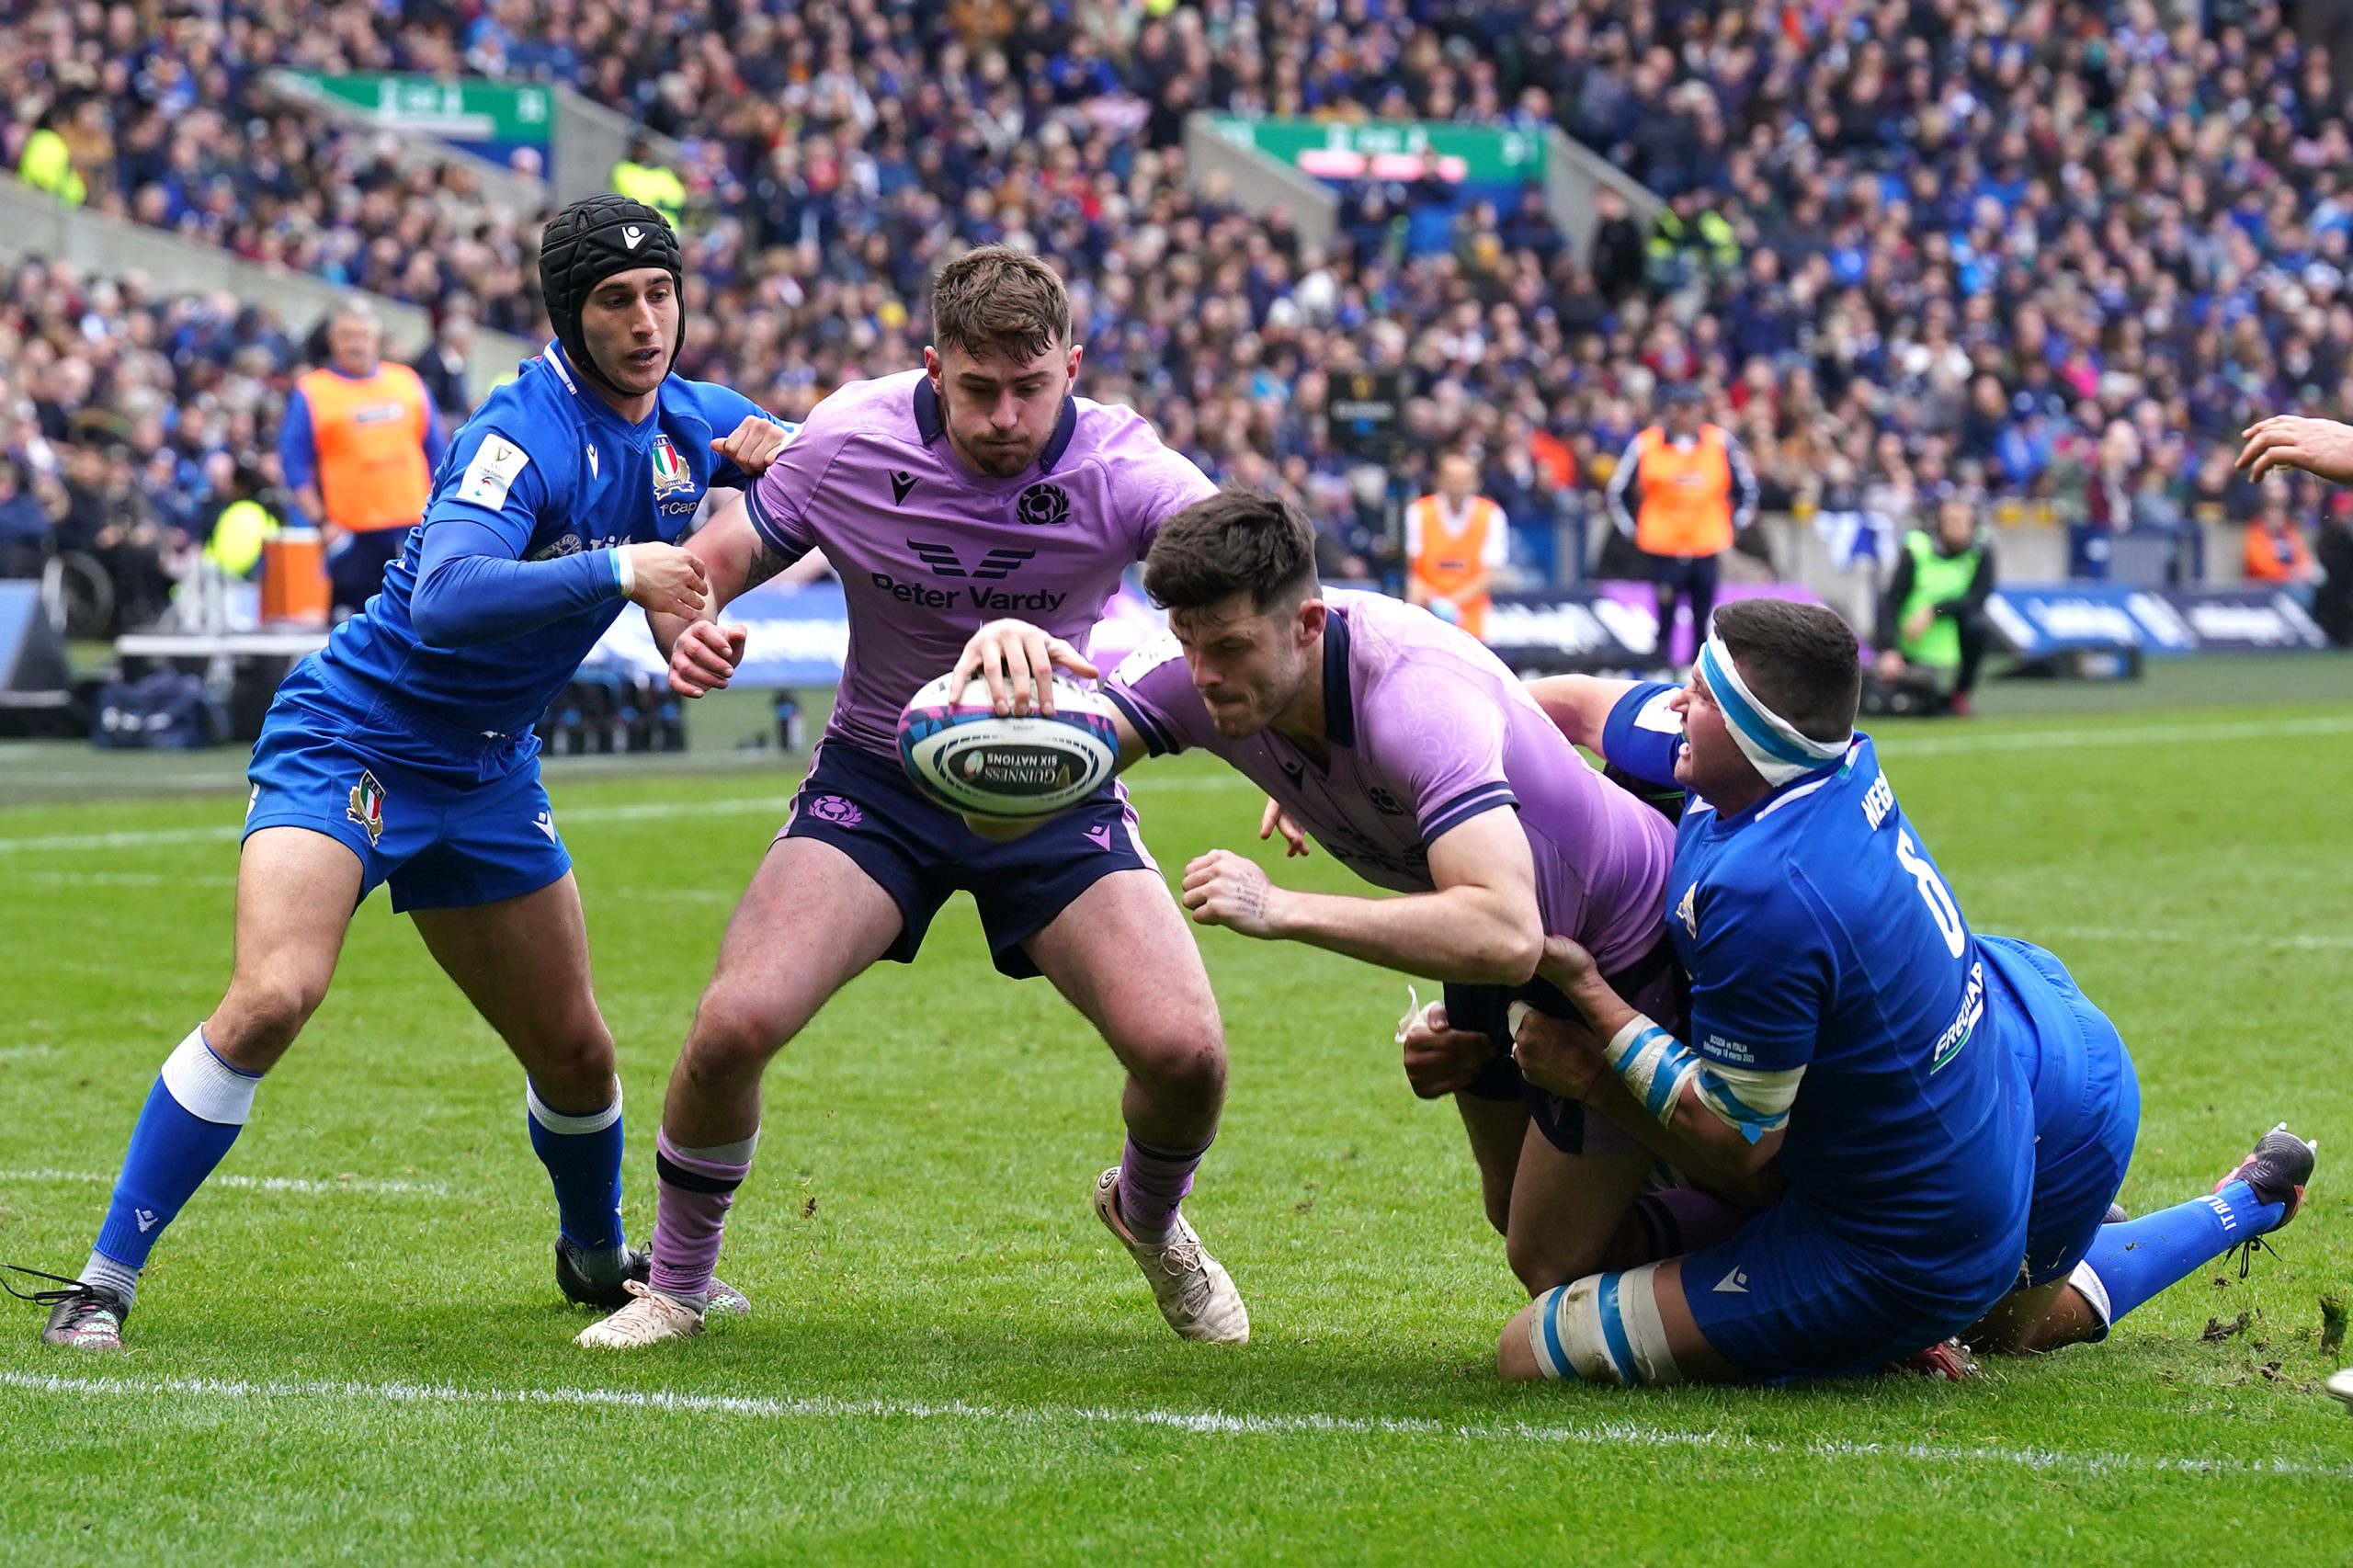 Kinghorn reigns at Murrayfield with hat-trick over Italy